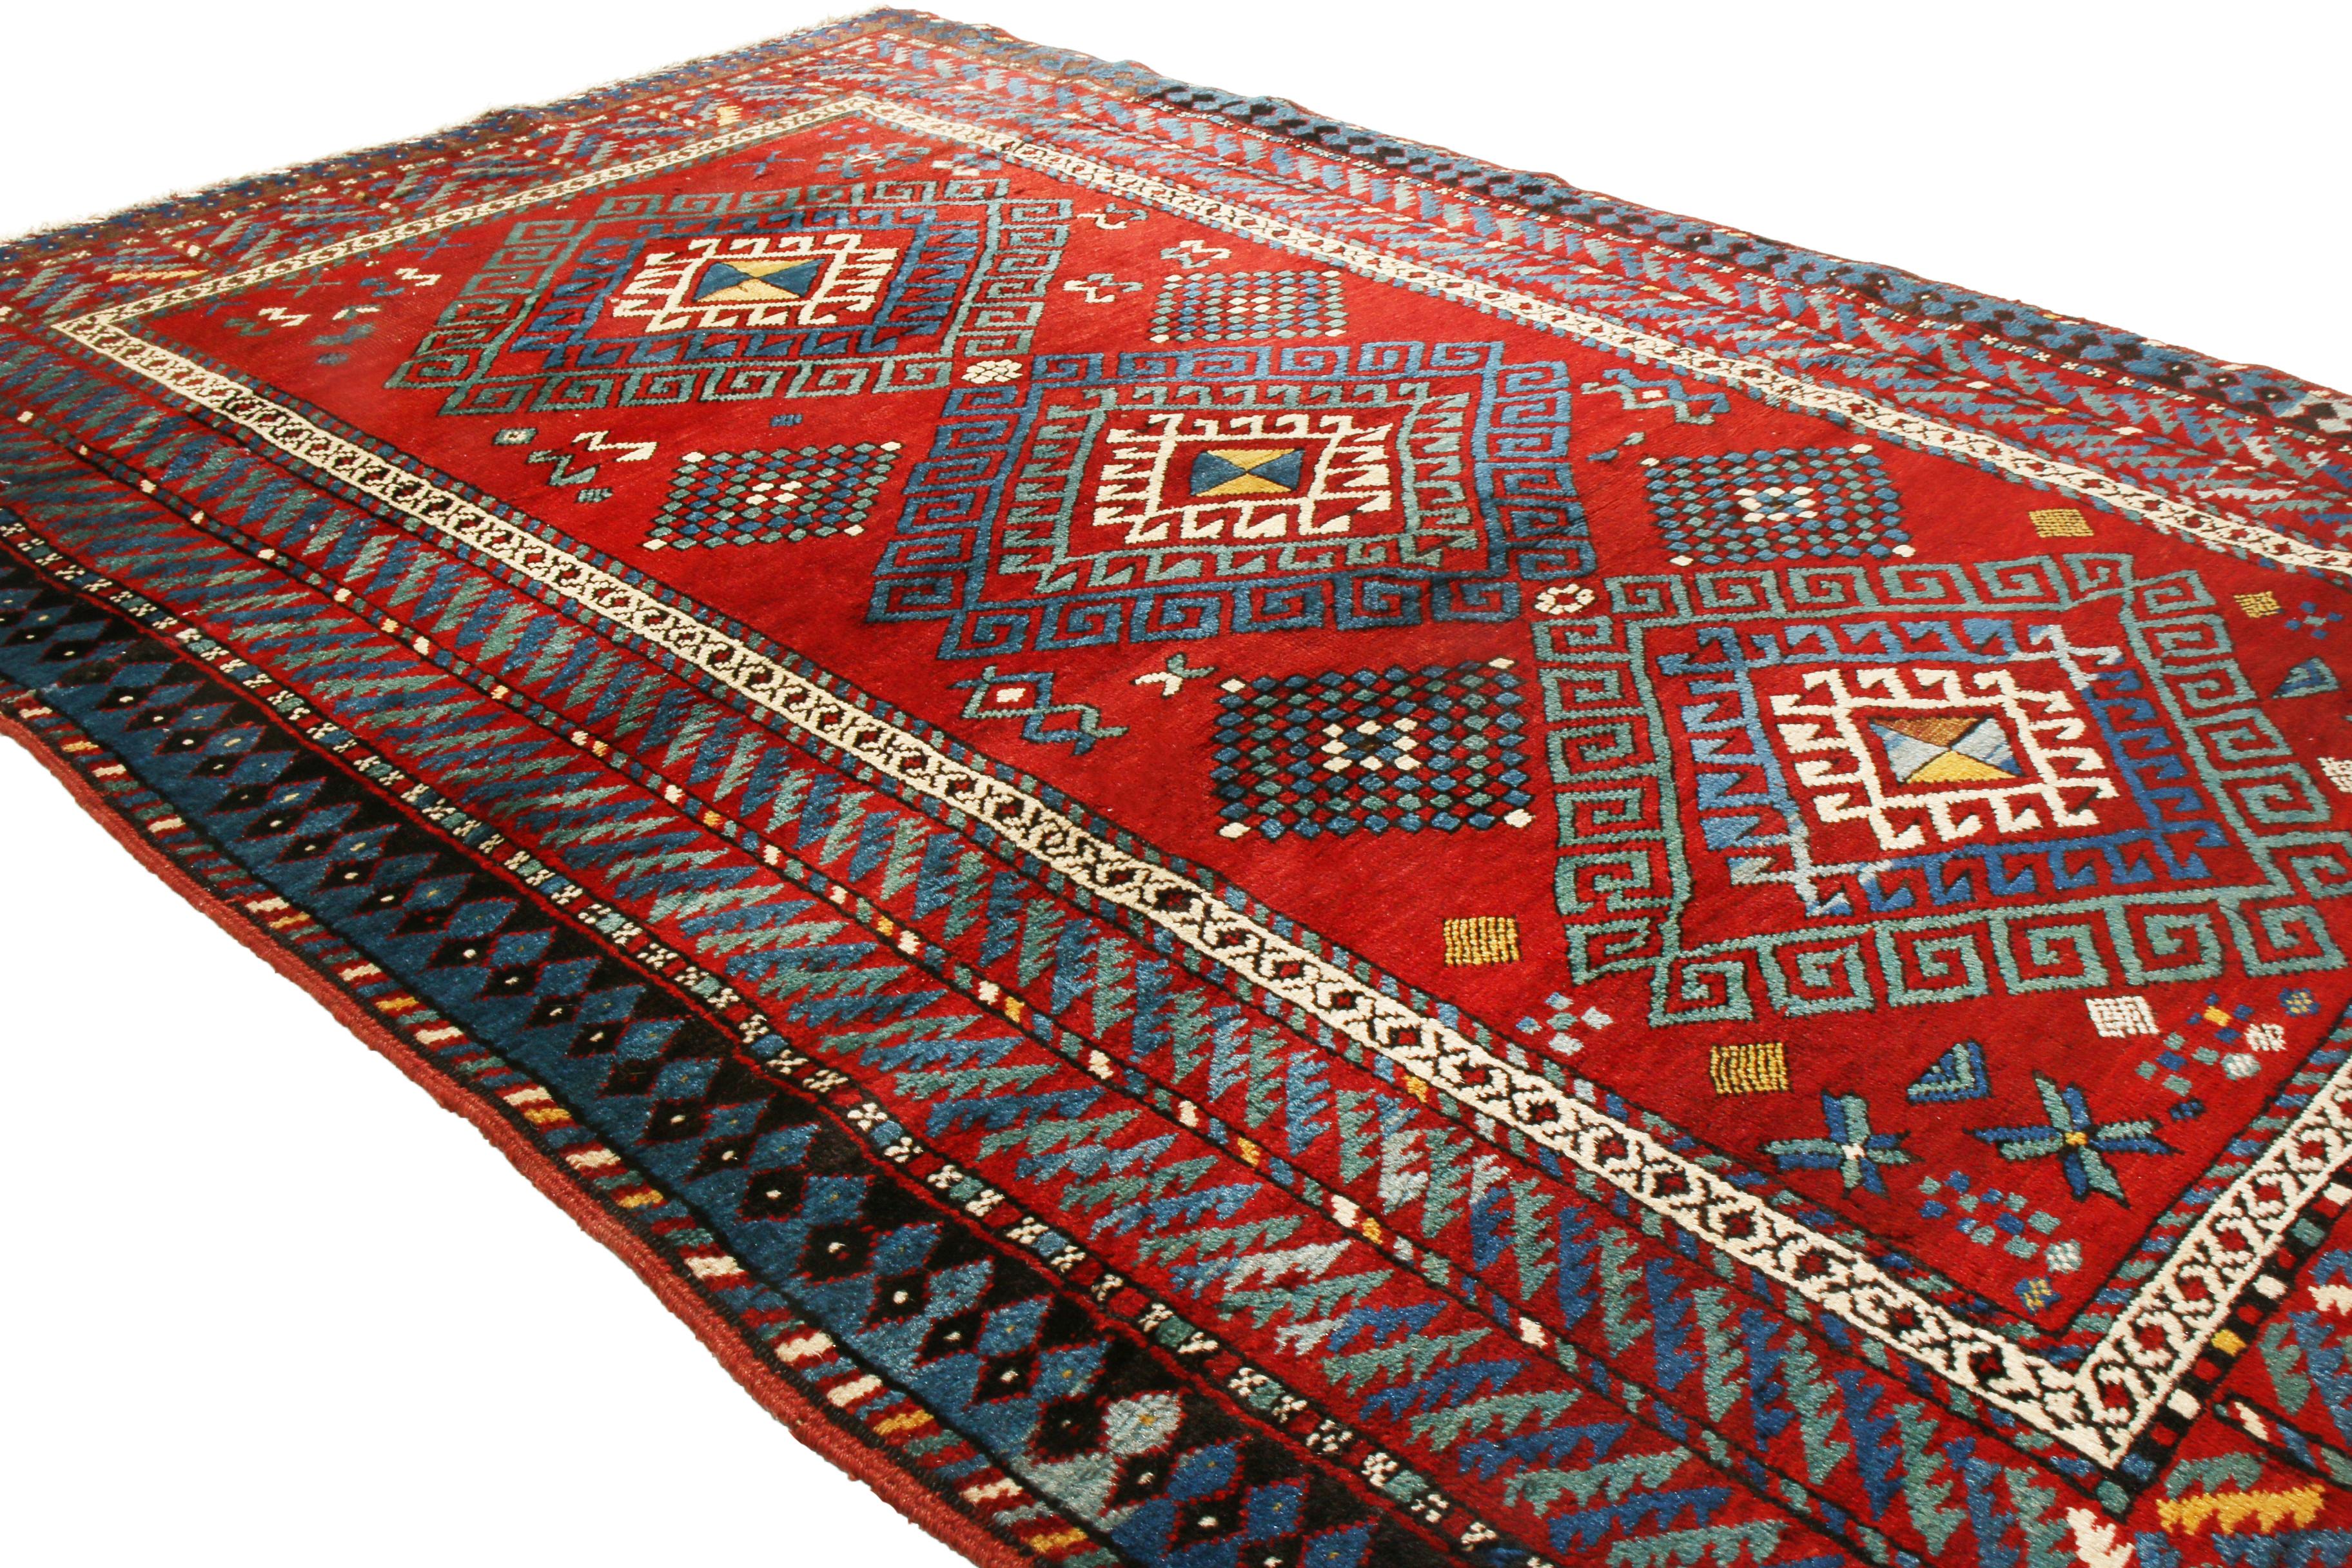 Originating from Russia between 1890-1900, this antique transitional Kazak rug features an emboldened series of Dyrnak guls among its rich and varied symbols throughout this all over field design. Hand knotted in high quality wool, the Dyrnak gul is